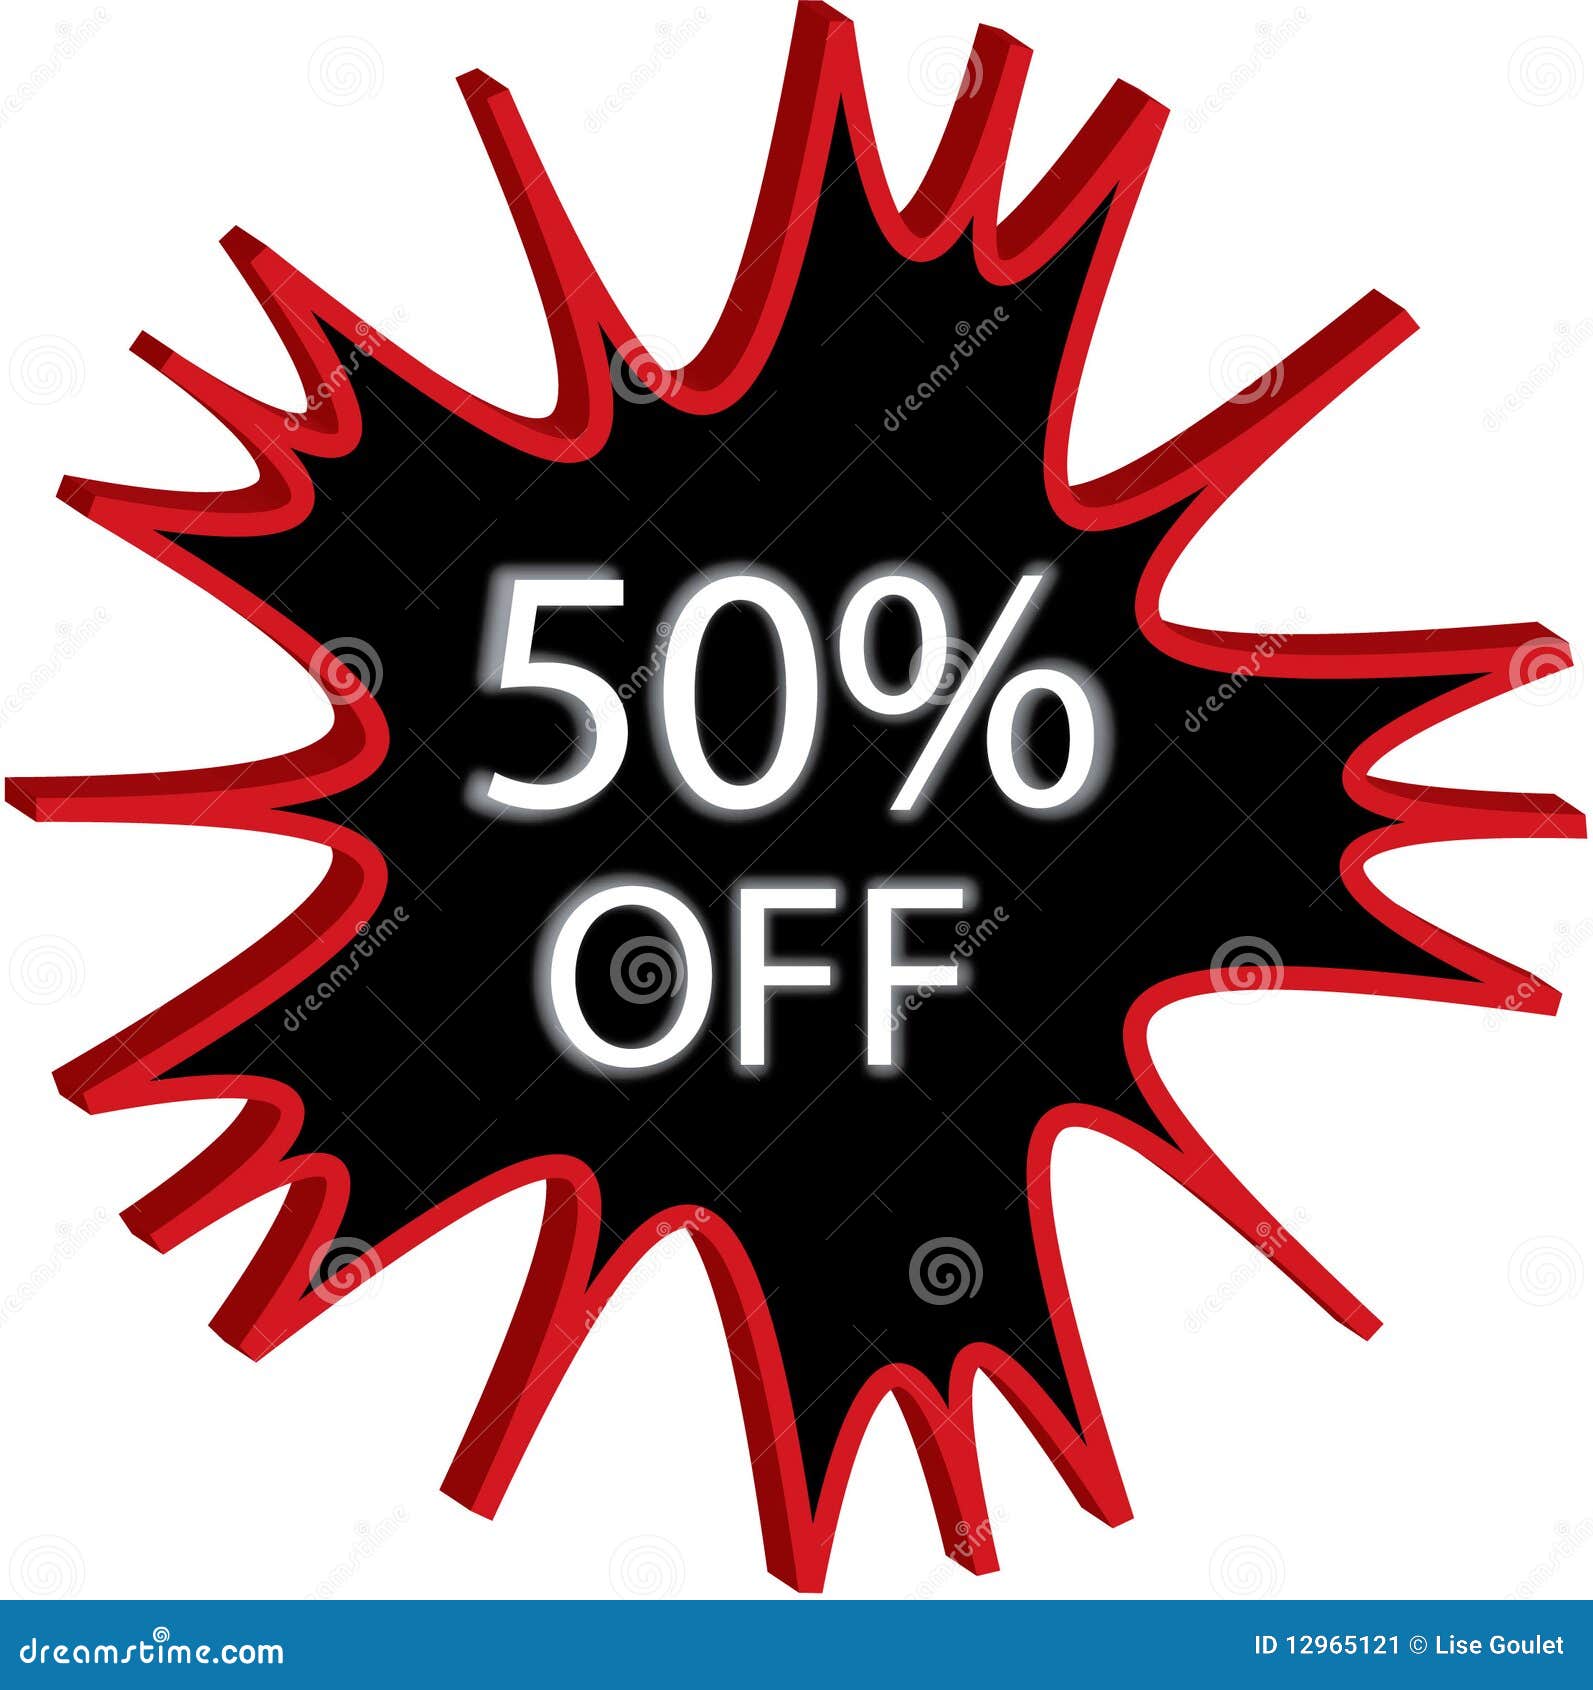 50% off sign 